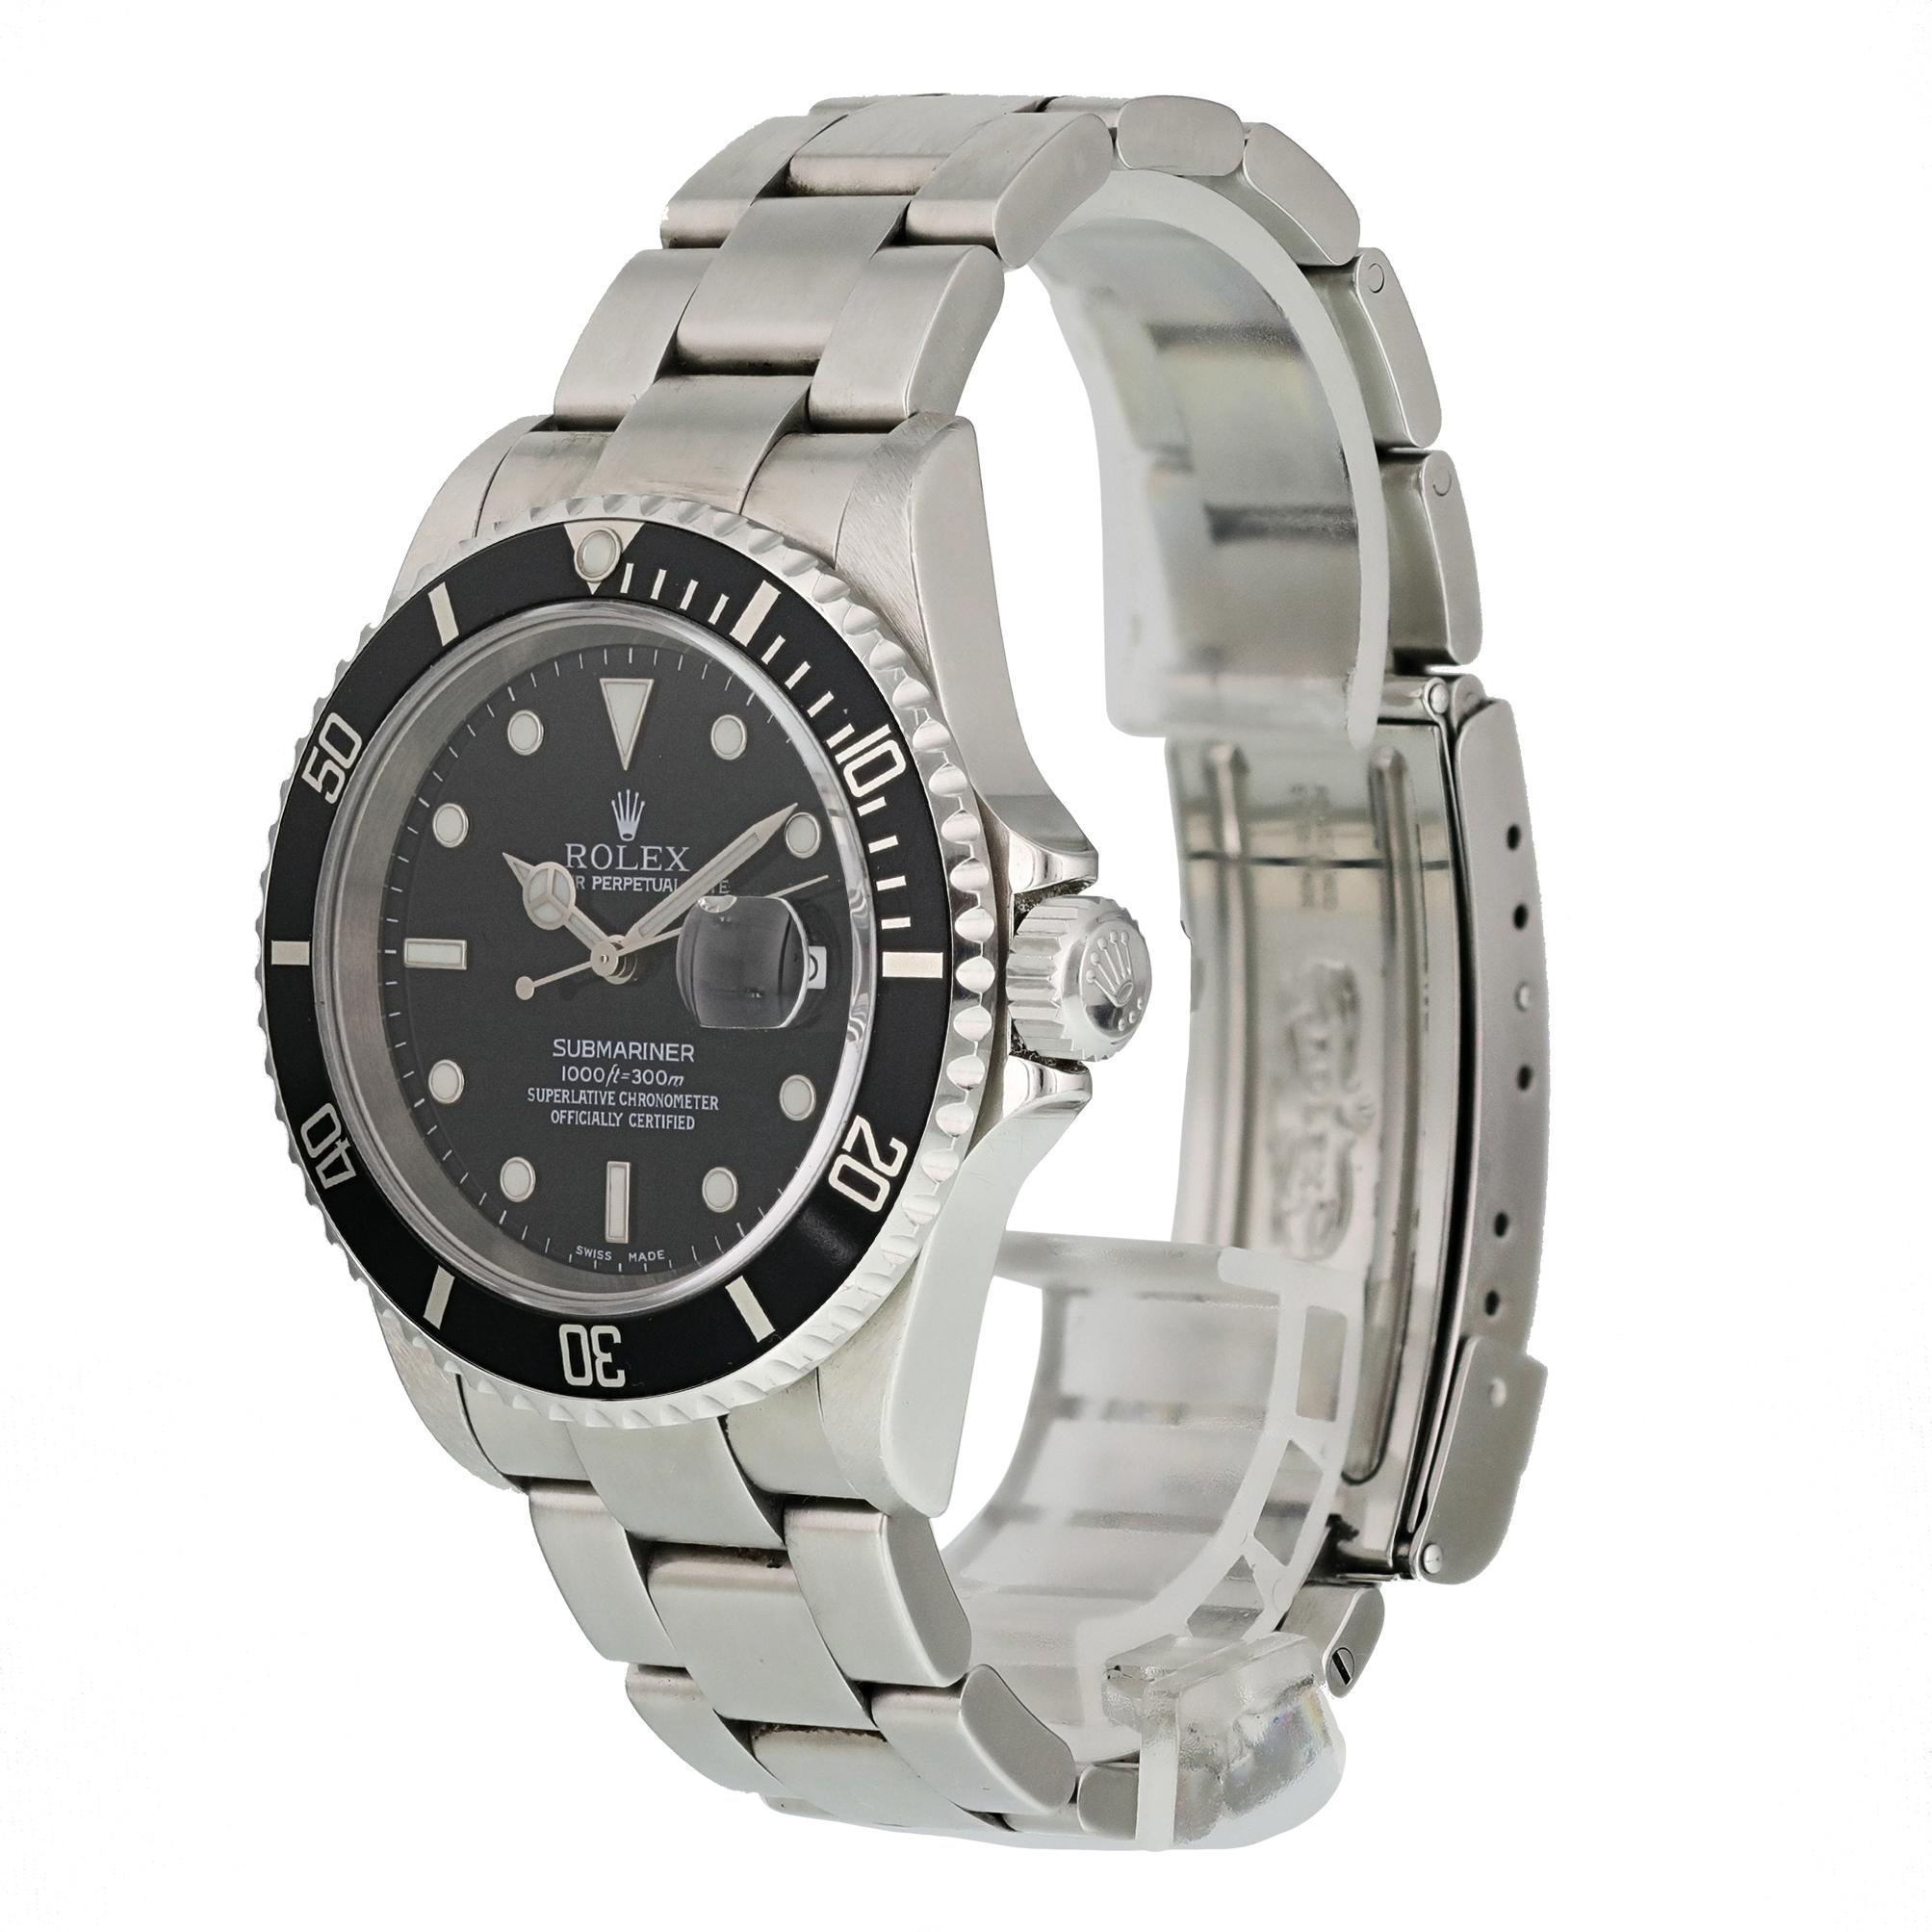 Rolex Submariner 16610 Men's Watch.
40mm Stainless Steel case. 
Stainless Steel Unidirectional bezel. 
Black dial with Luminous Steel hands and index, dot hour markers. 
Minute markers on the outer dial. 
Date display at the 3 o'clock position.